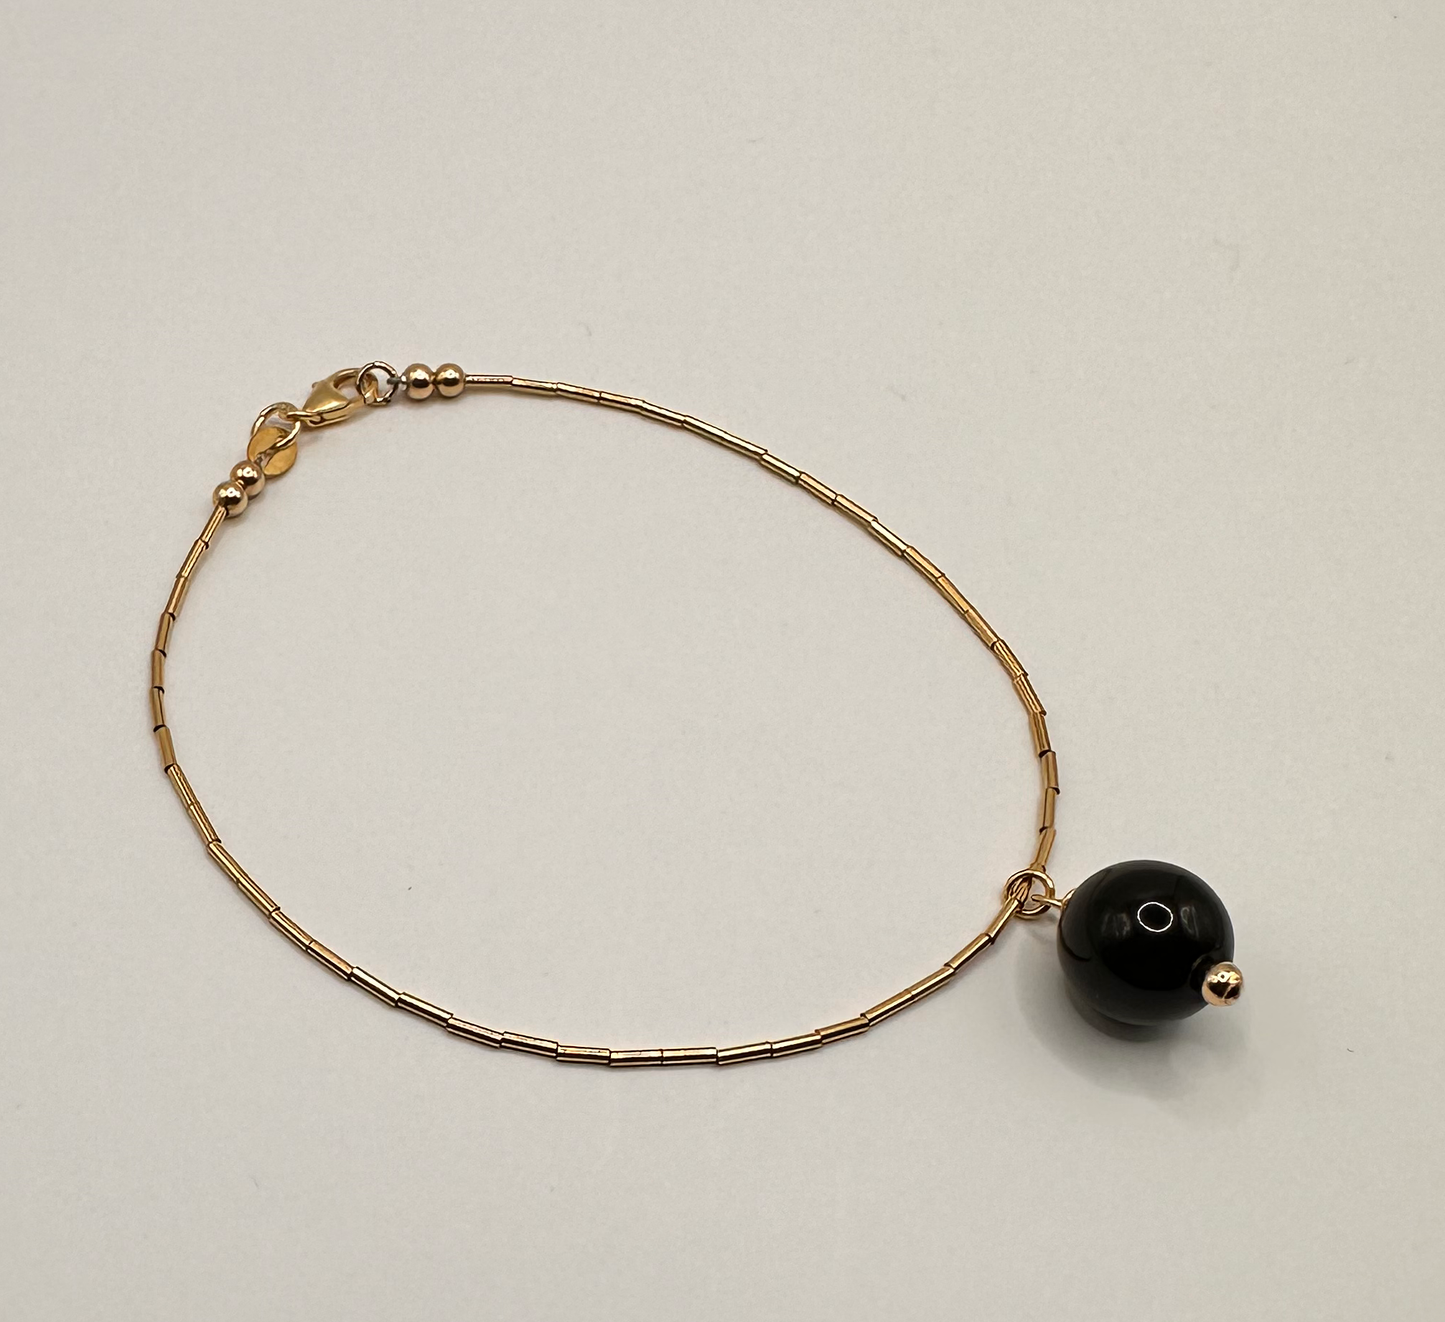 Beautiful 14kt Gold Filled with a Accent Black Onyx Bead Bracelet